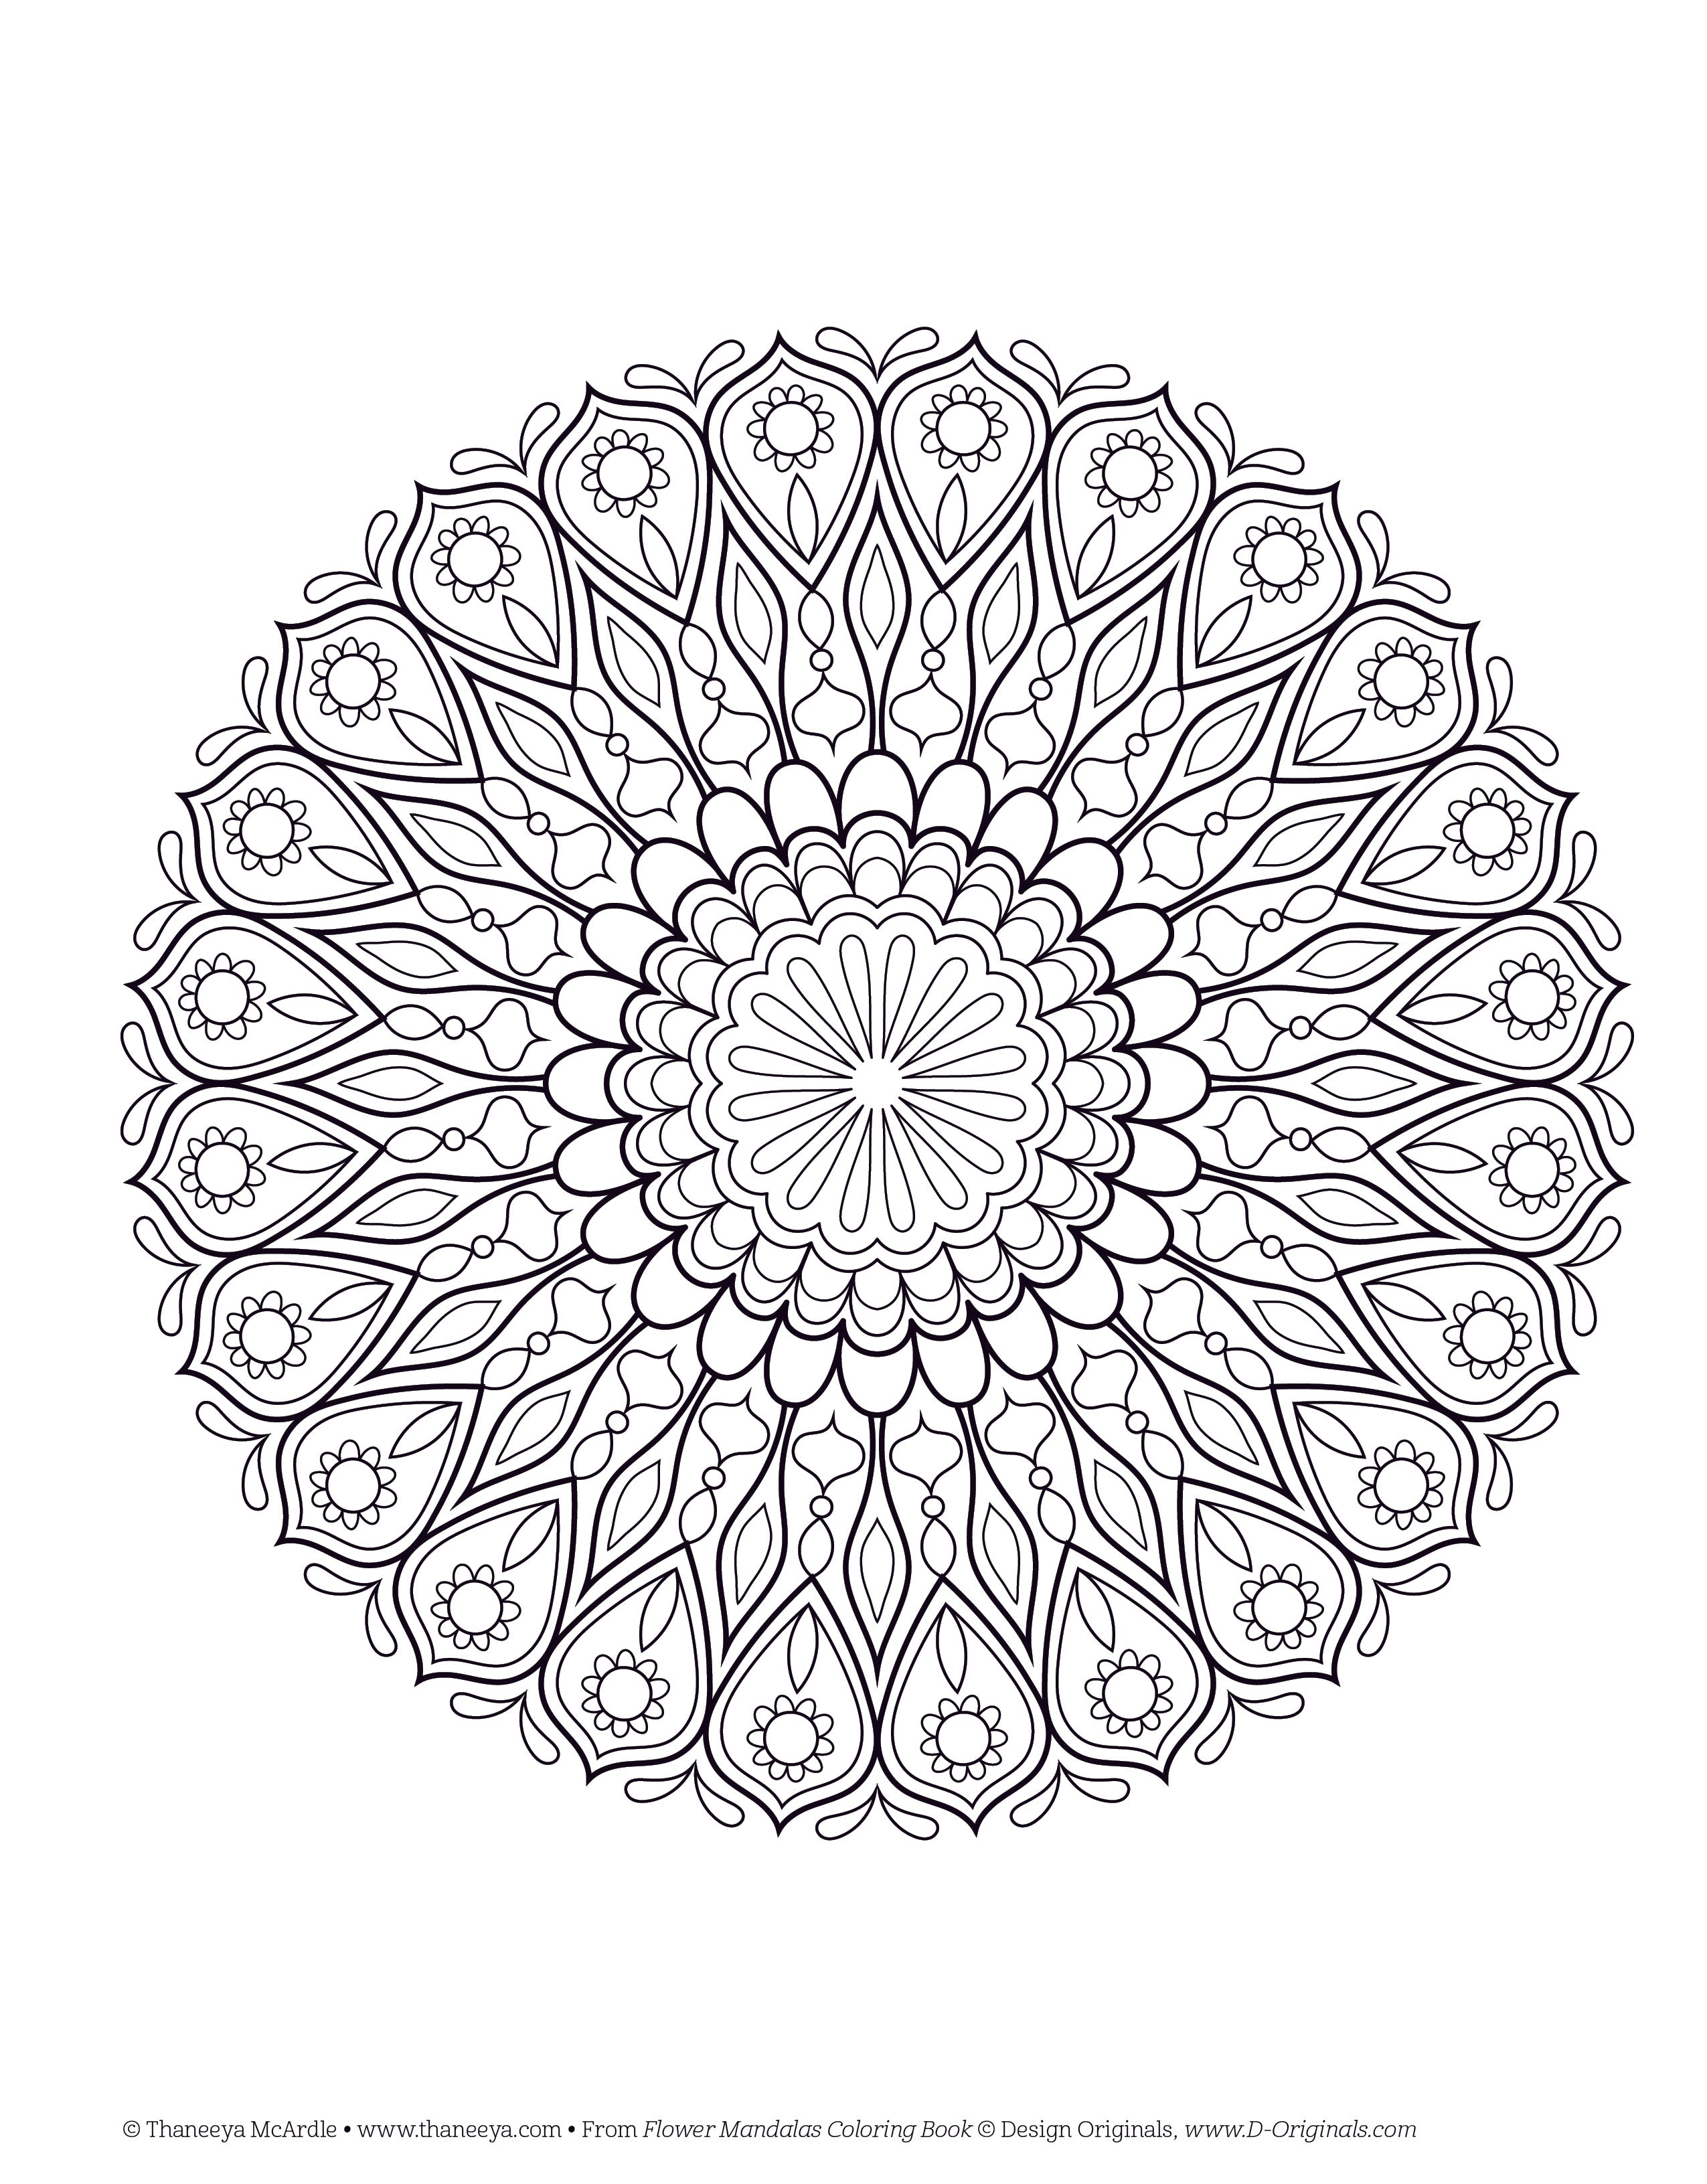 Whimsical Mandalas Coloring Page from Thaneeya McArdle's Ultimate Guide to  Using Alcohol Markers